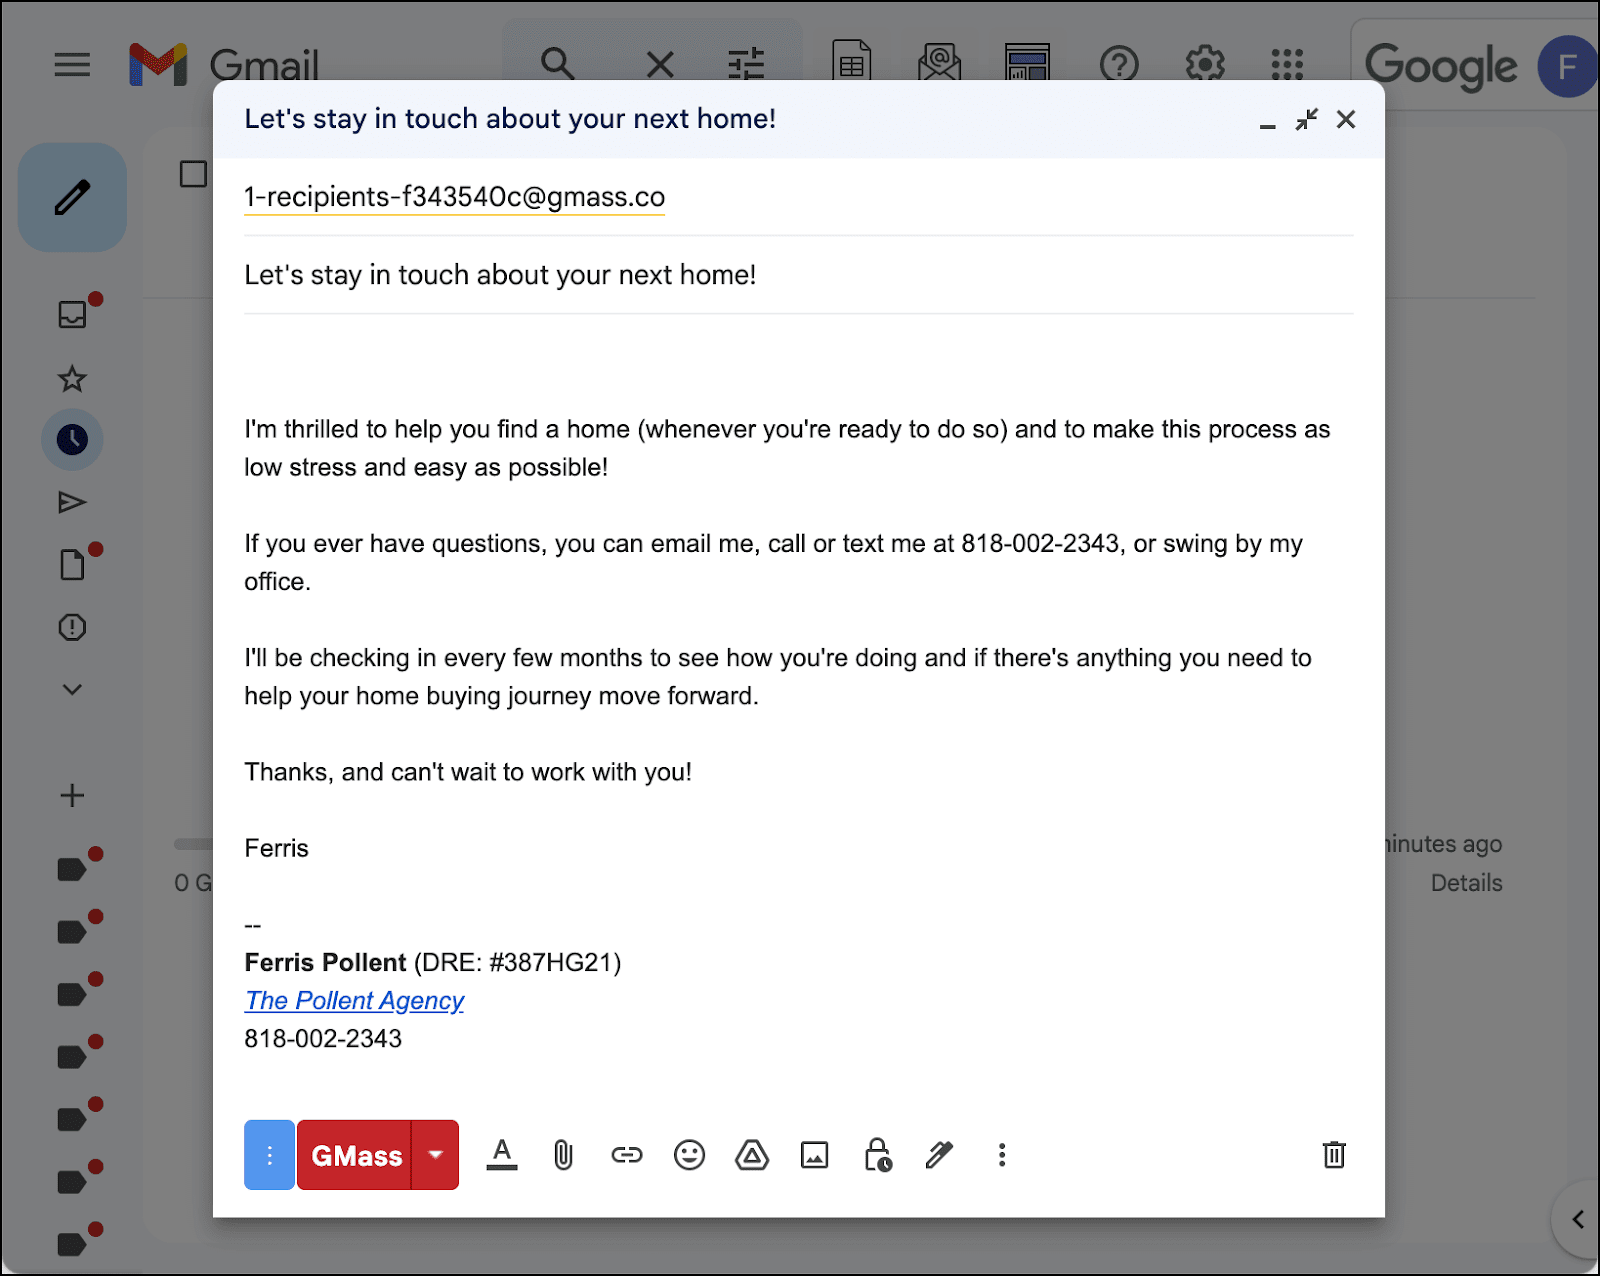 Write your initial email